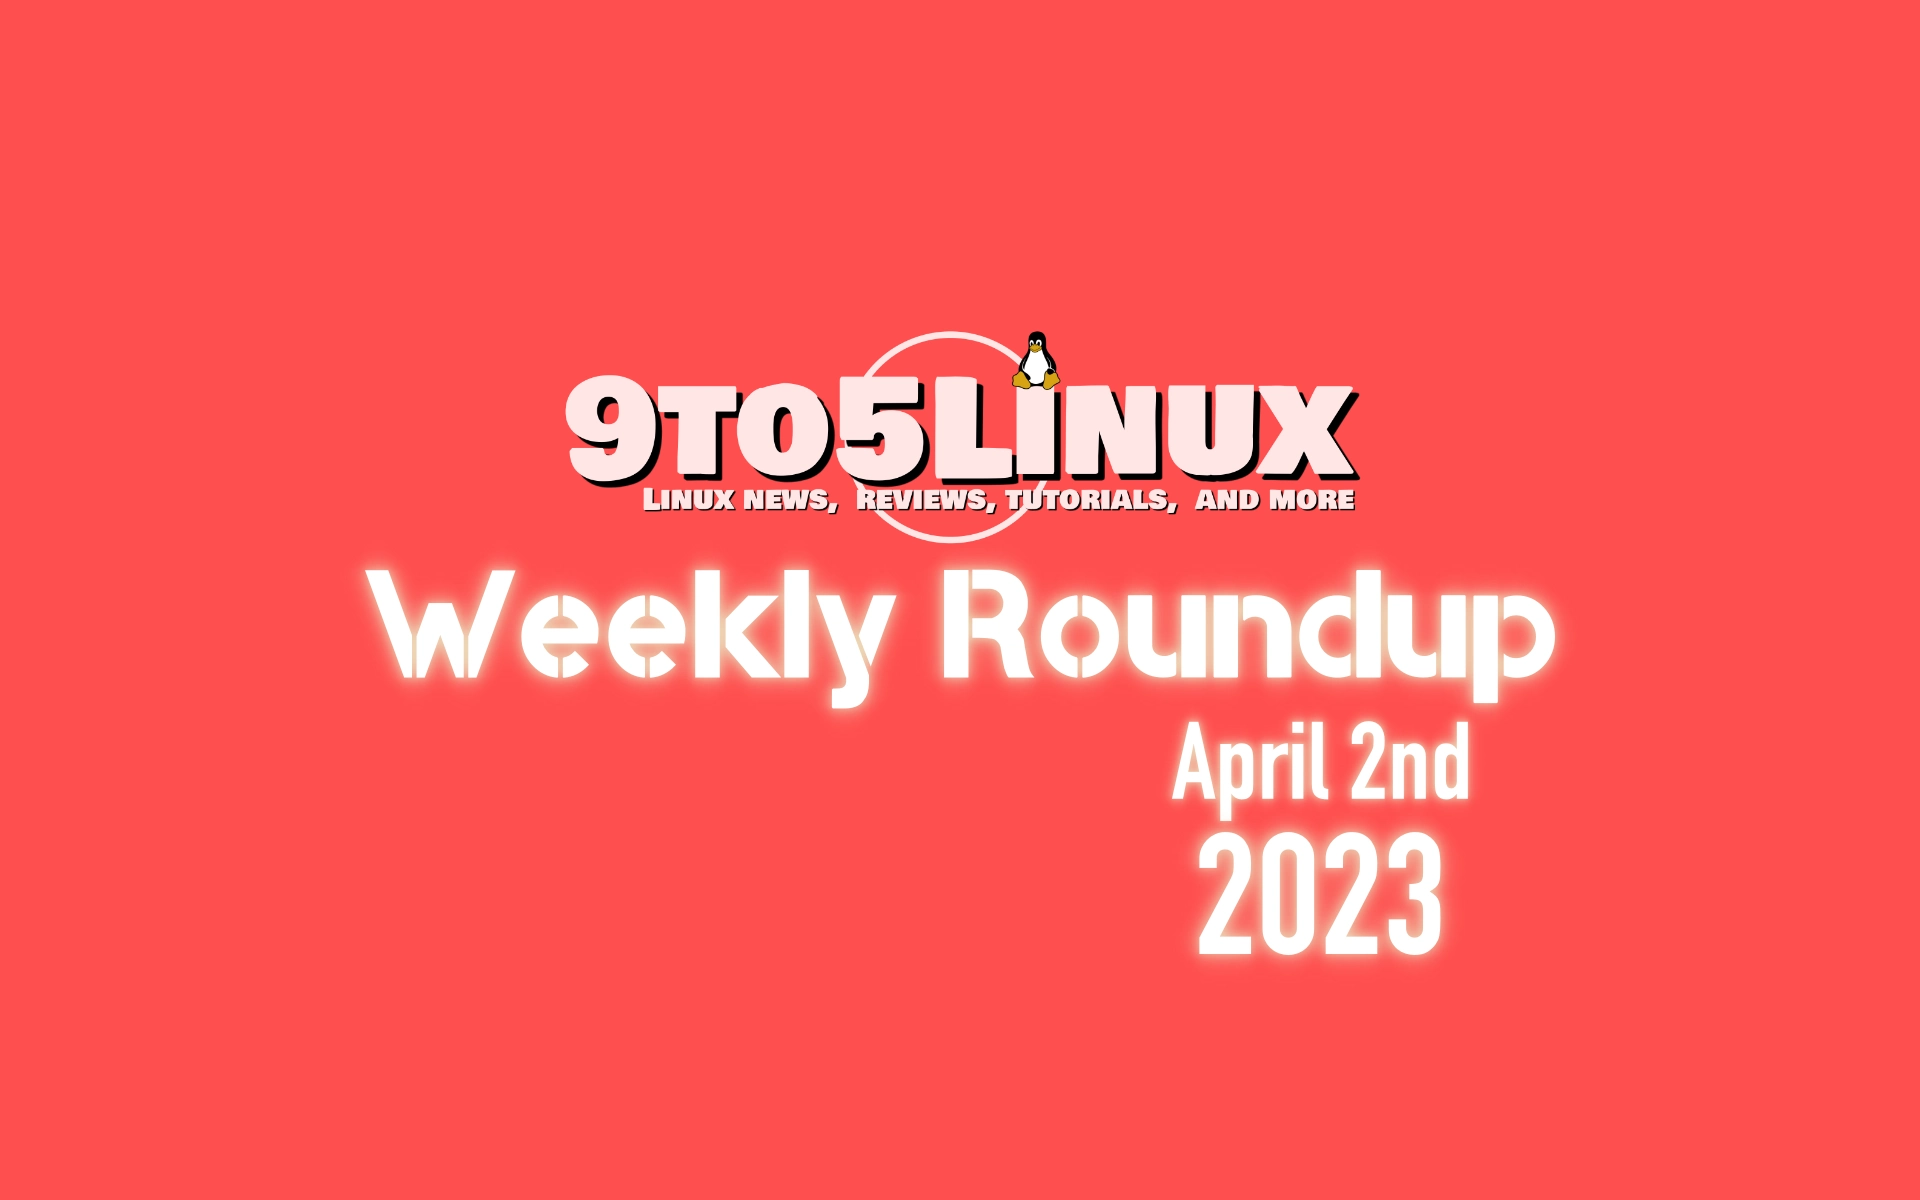 9to5Linux Weekly Roundup: April 2nd, 2023